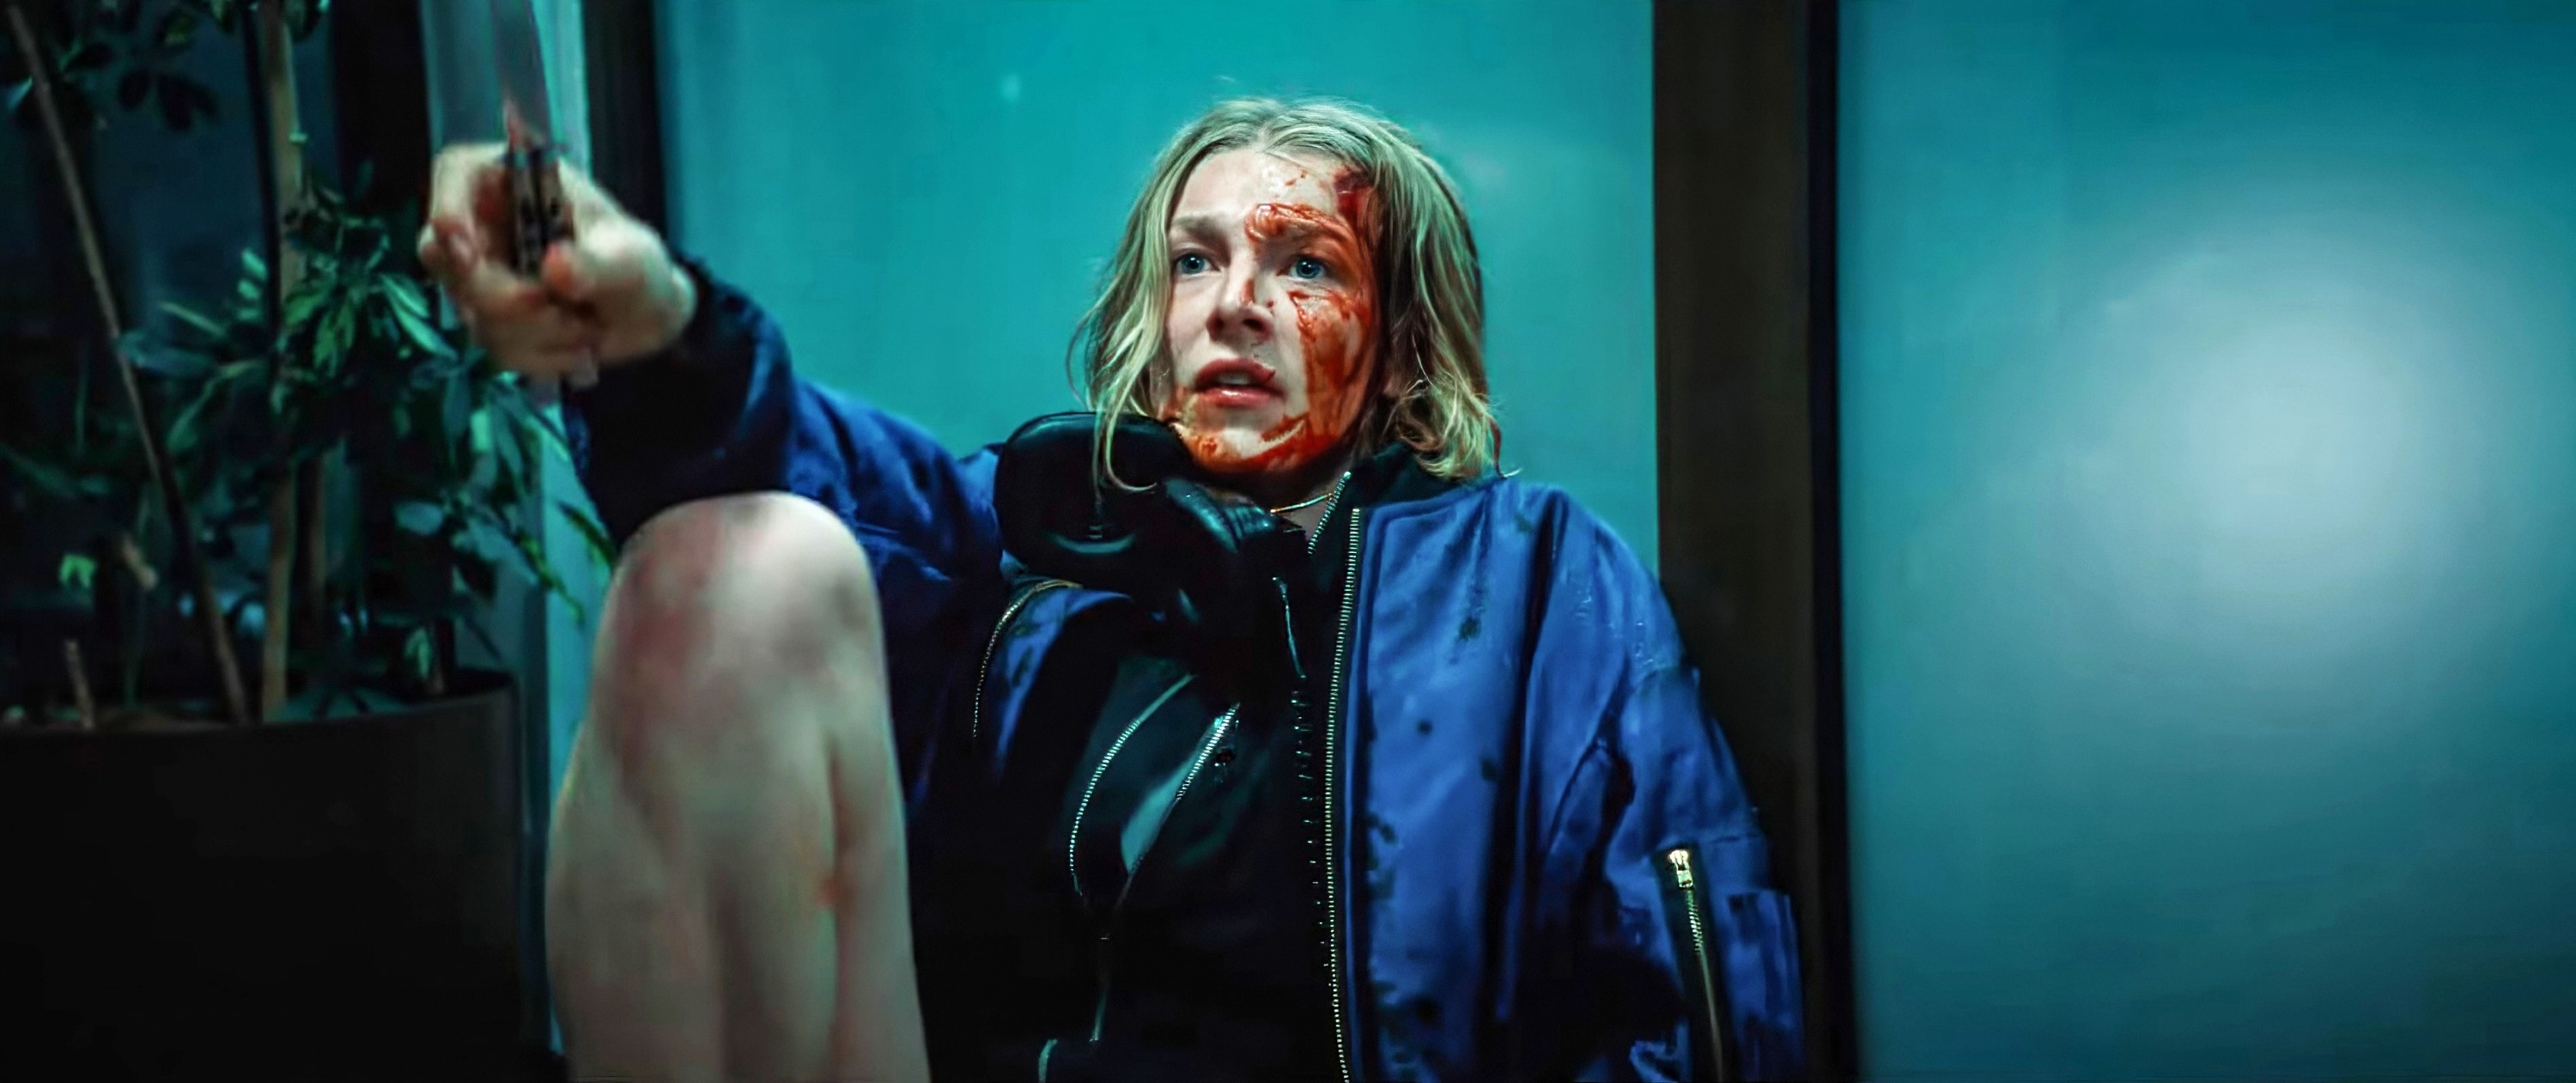 Gretchen (Euphoria’s Hunter Schafer), a teenage girl with her face and hands covered in blood, sits outside against a glass door and waves a knife at an unseen assailant in Tilman Singer’s Cuckoo